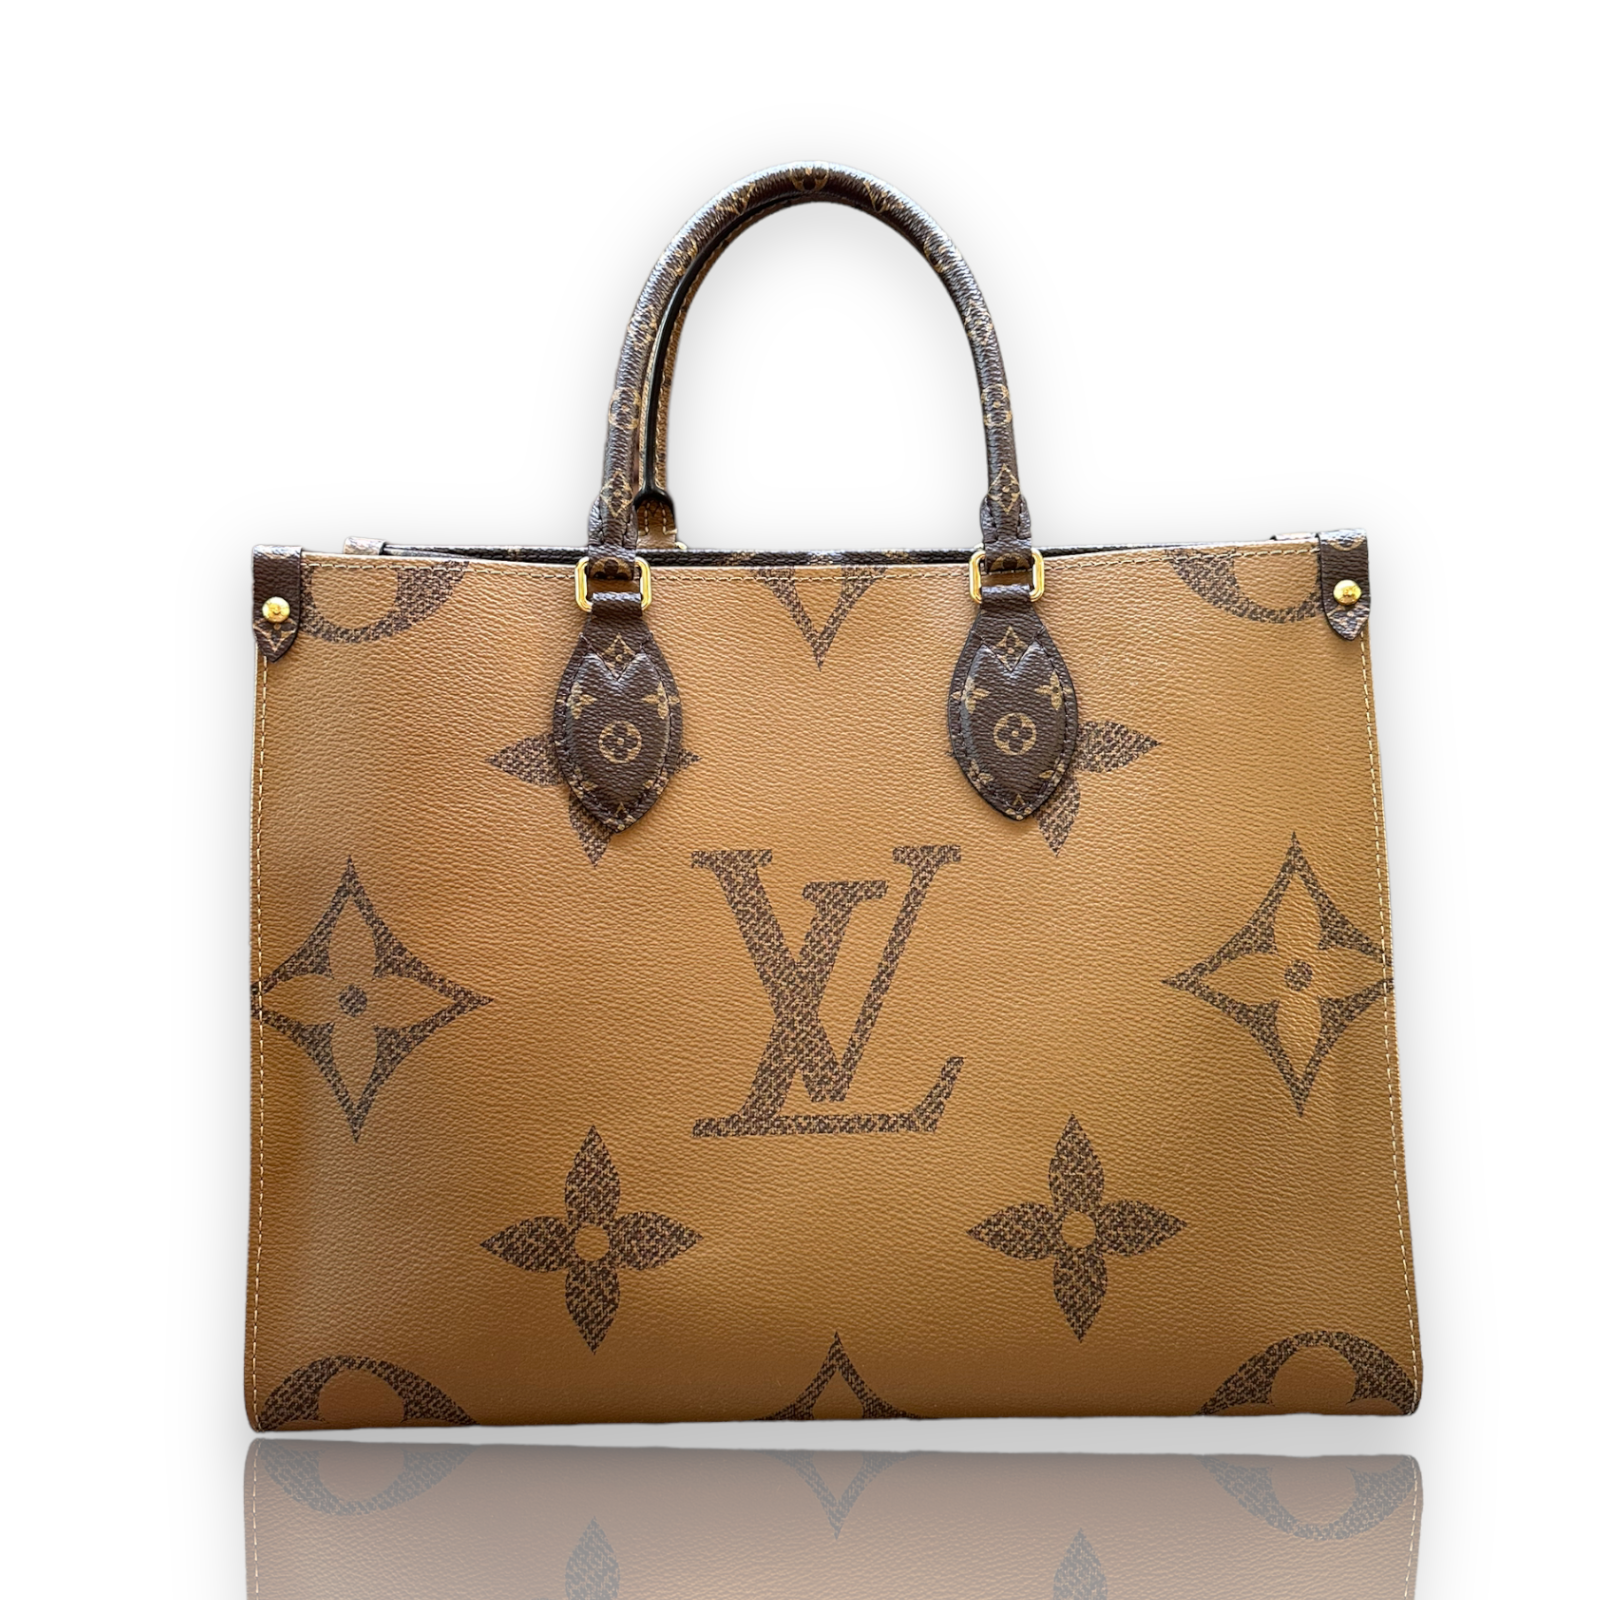 Louis Vuitton Speedy 30 Honest Review Should I Sell My Bag? - Luxury